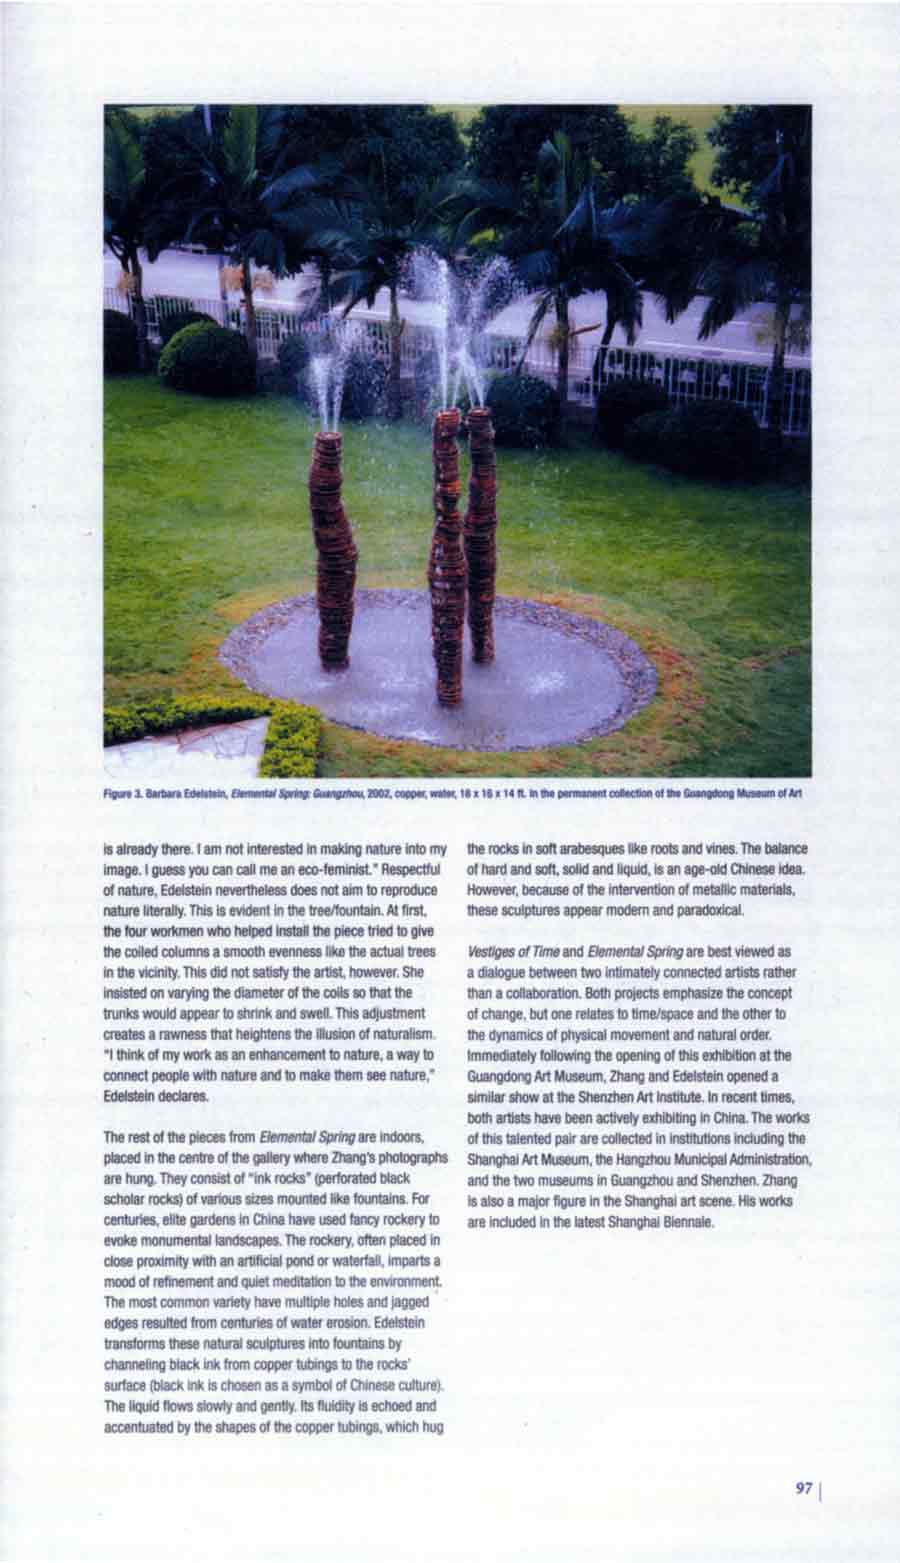 Vestiges of Time / Elemental Spring: Zhang Jian-Jun and Barbara Edelstein in Guangdong, review, pg 3